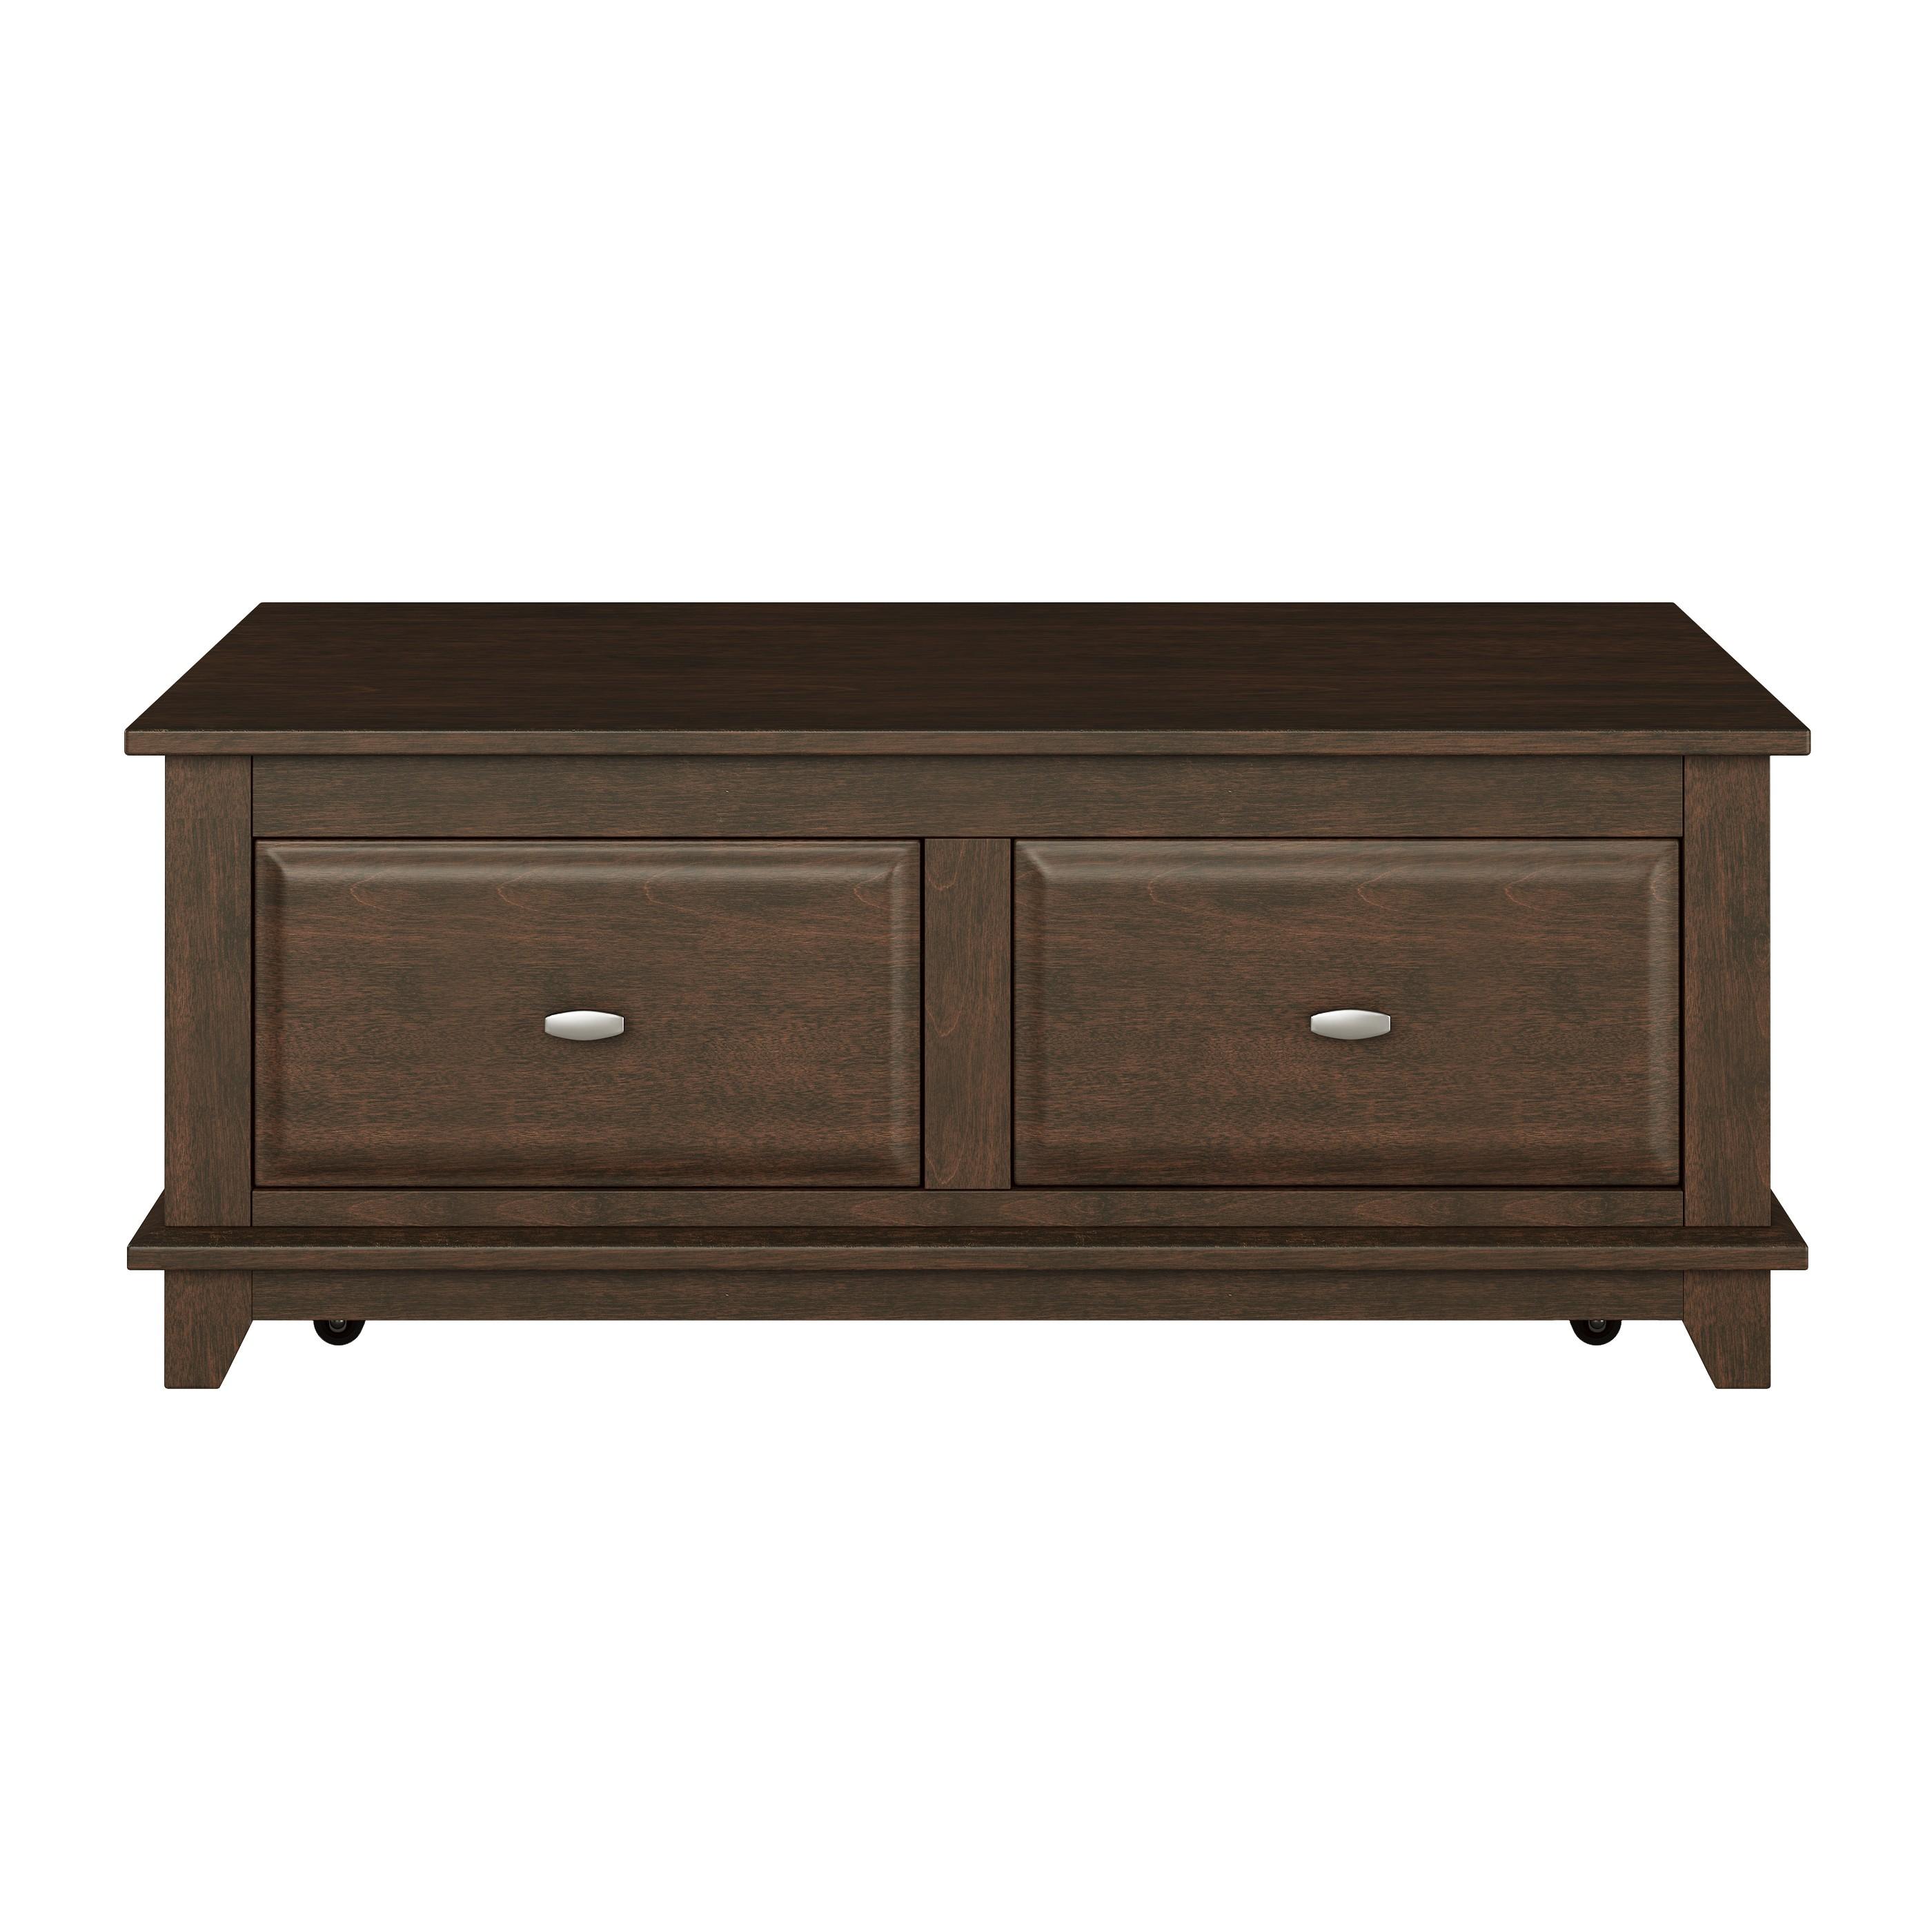 Transitional Cocktail Table 3621-30 Minot 3621-30 in Cherry 